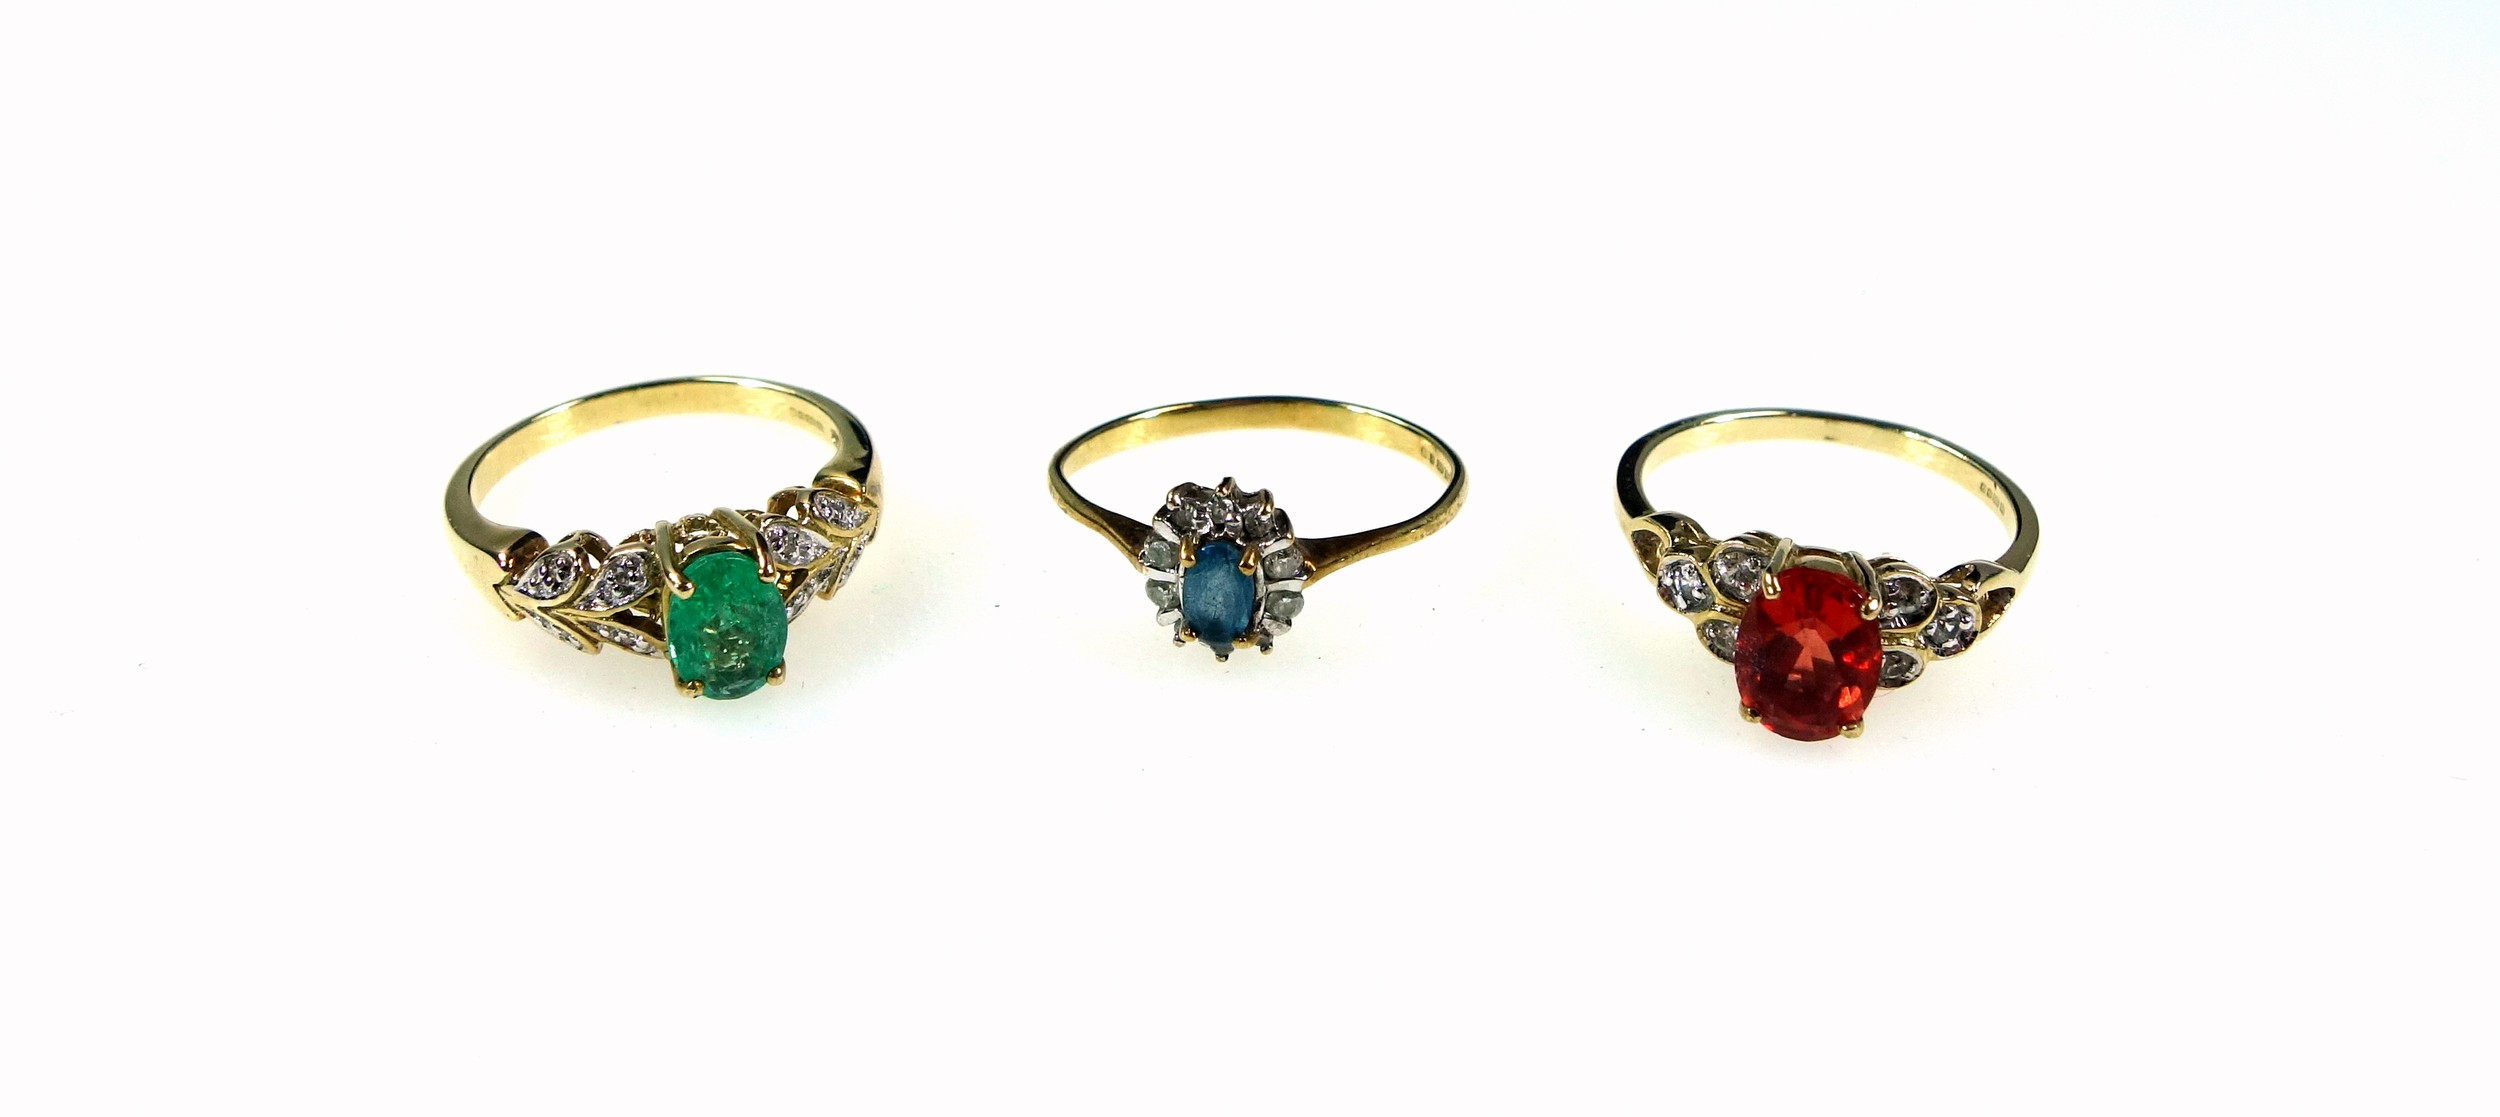 9ct gold ring set topaz and 6 diamonds, 9ct ring set pale green stone and brilliants, and a 9ct ring